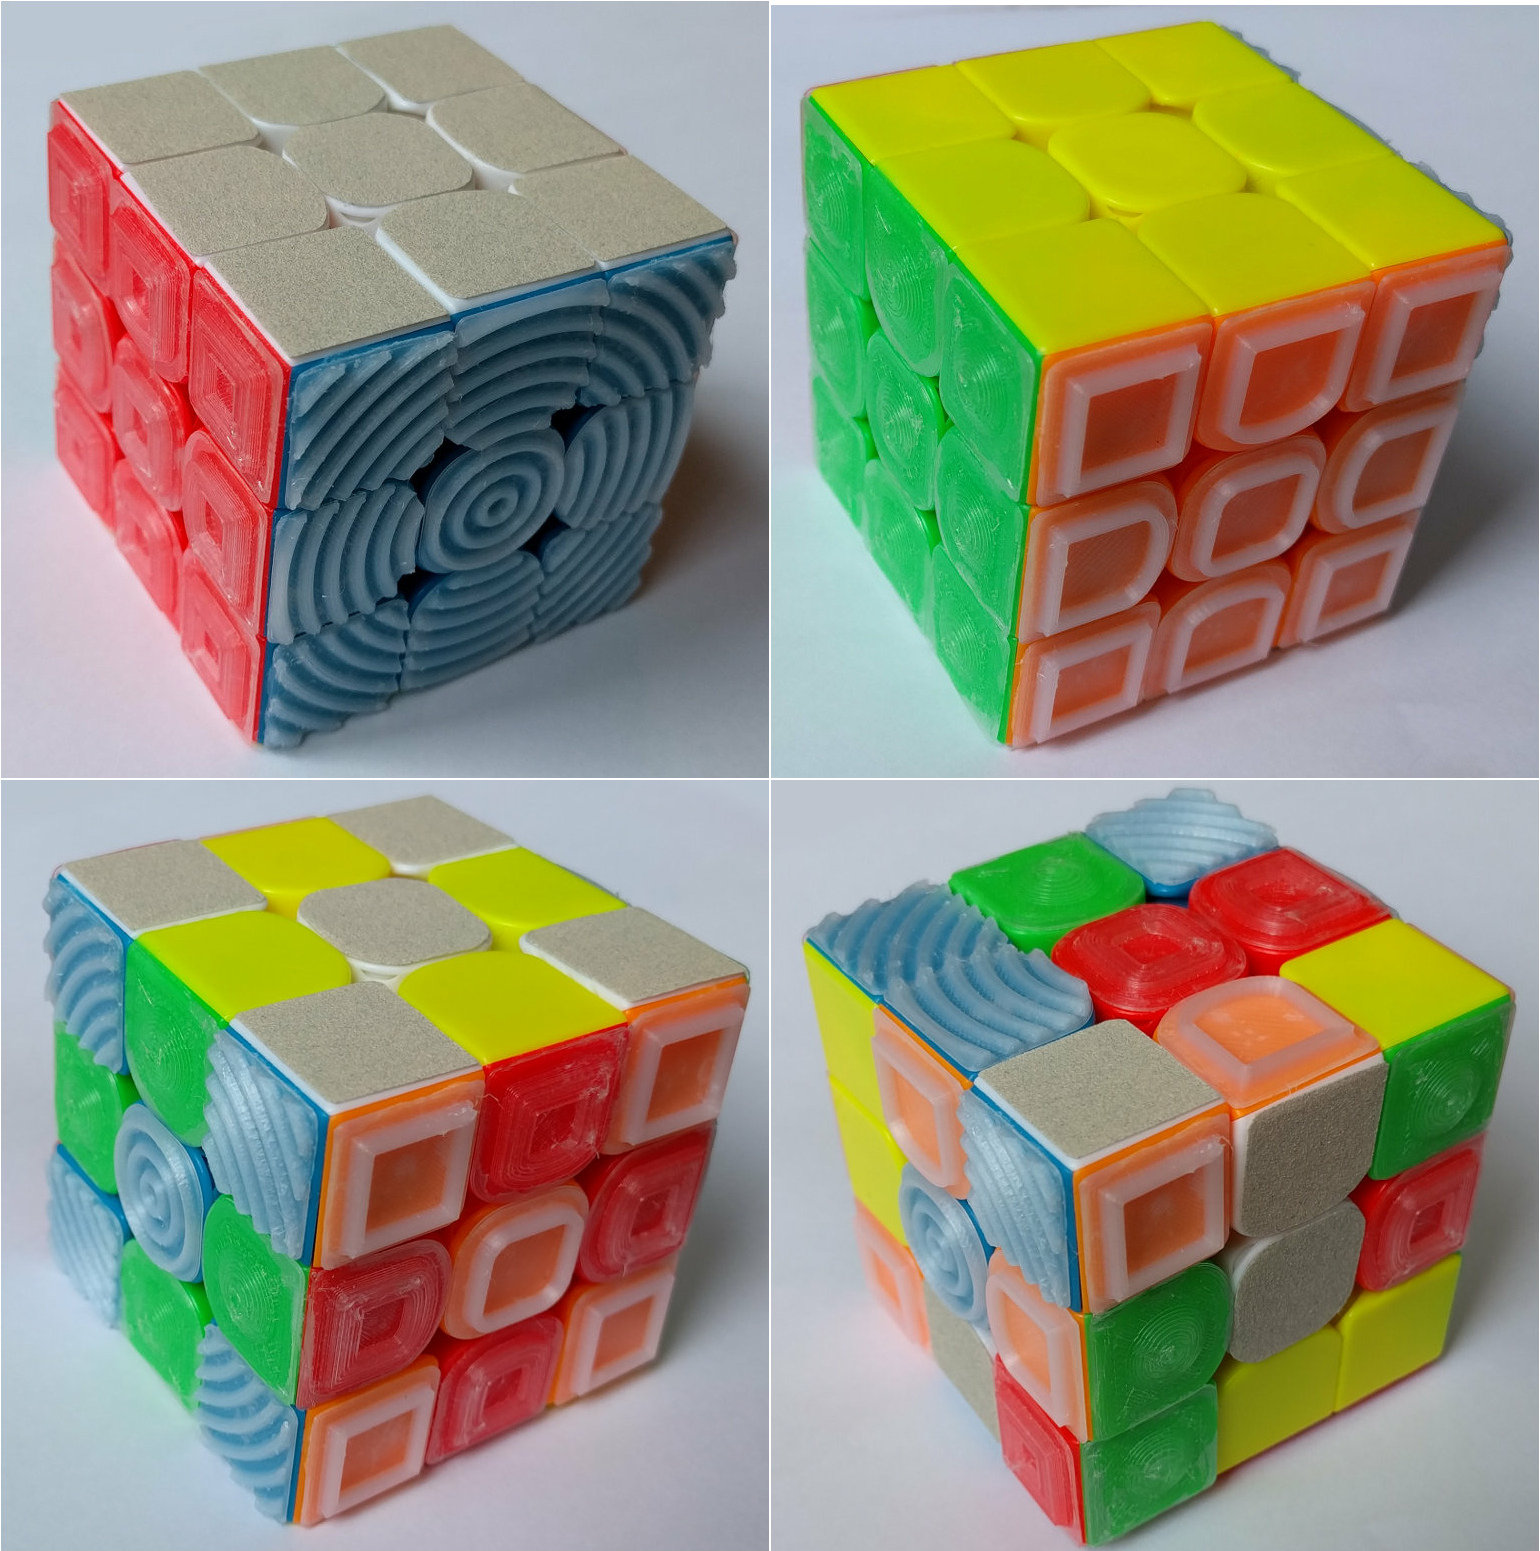 Four views of a 3x3x3 twisting puzzle cube. The tiles of the puzzle are distinguishable both by color and by texture. The six surface textures are: unadorned plastic (yellow), sandpaper (white), high narrow walls (orange), low thick walls (red), ripples (blue), and bumps (green).